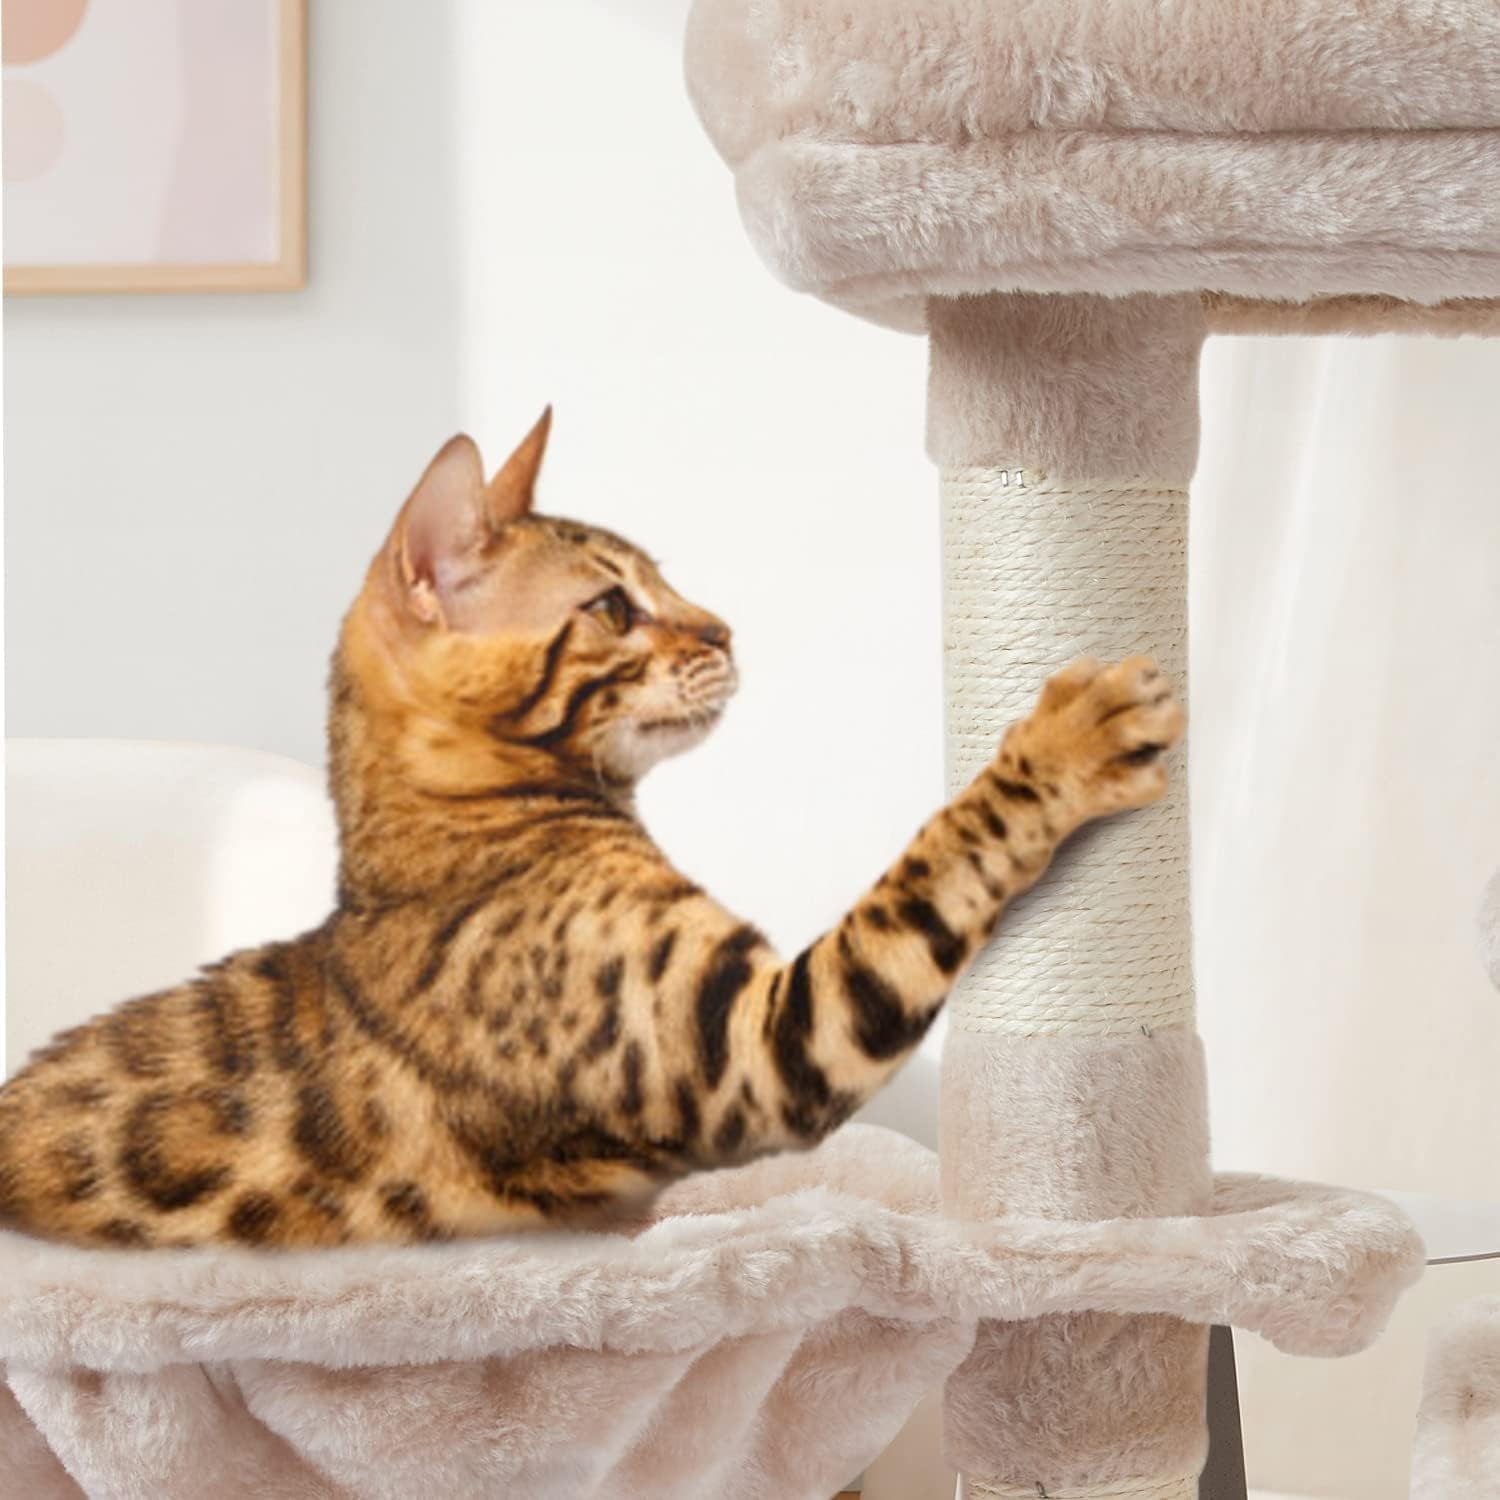 "Ultimate Play Haven for Your Furry Friend: Adorable Cat Tree with Scratching Posts, Jump Platform, and More!"